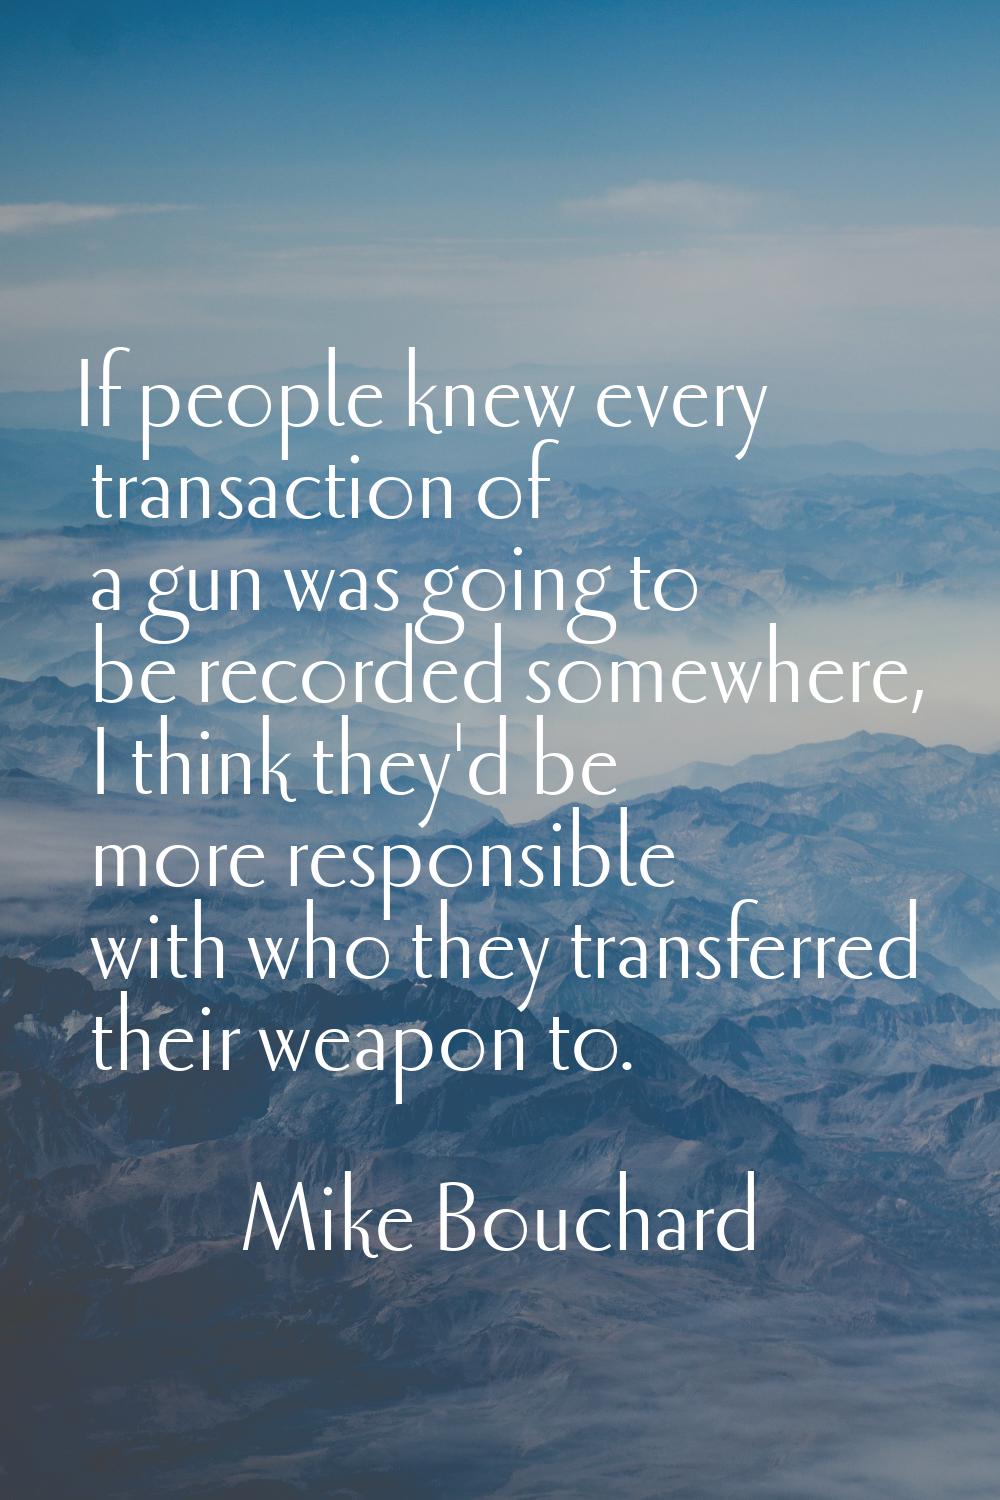 If people knew every transaction of a gun was going to be recorded somewhere, I think they'd be mor